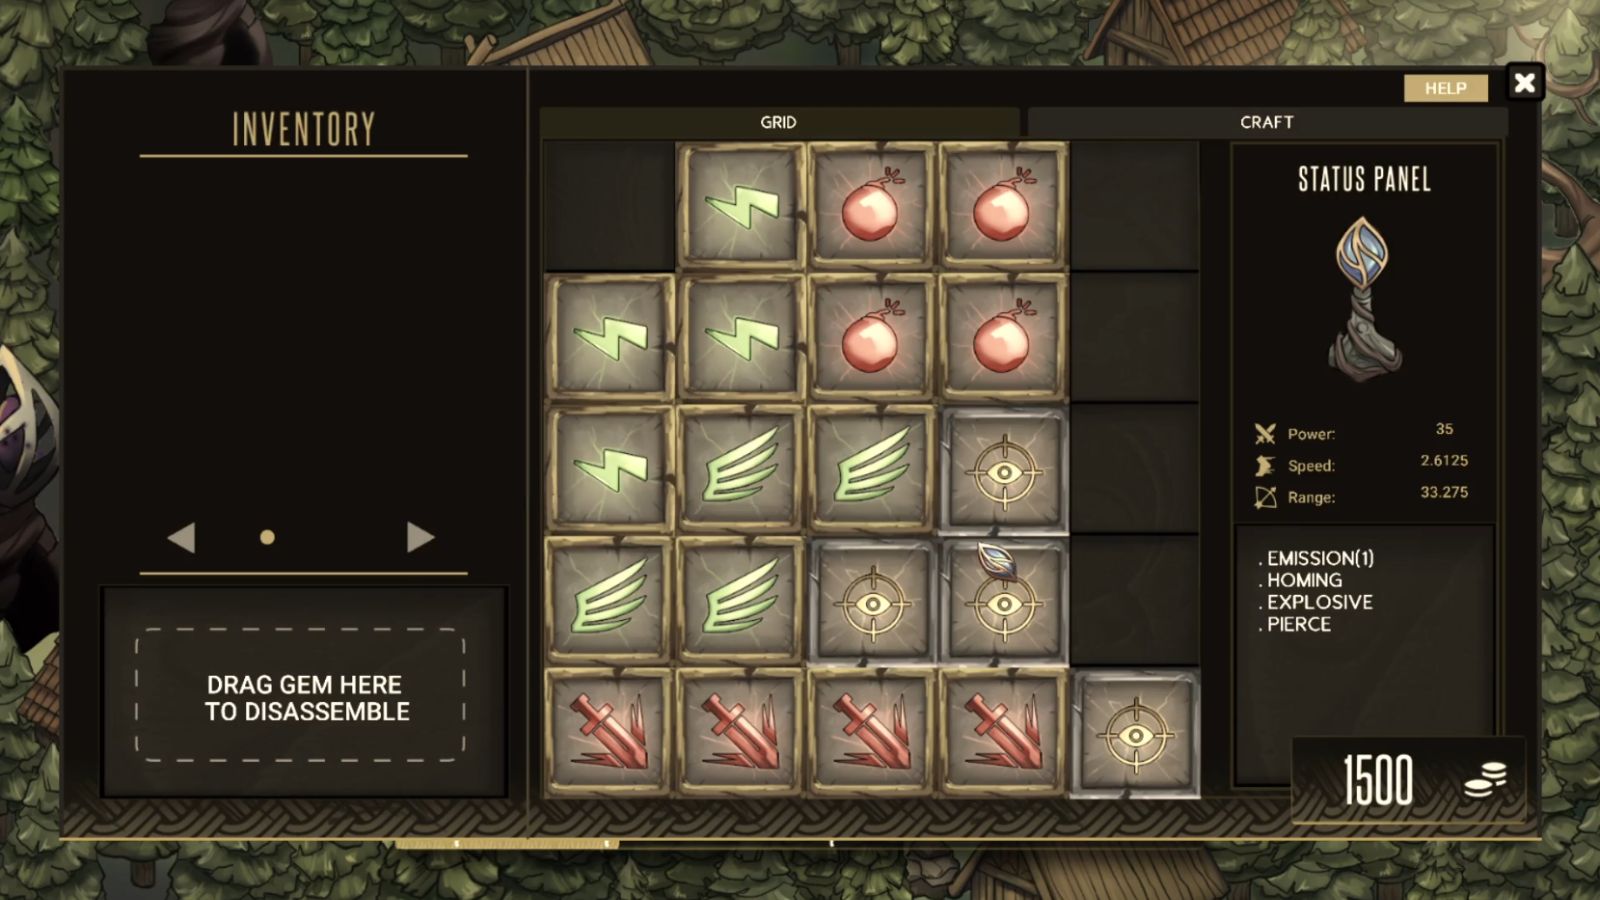 Various icons are shown inside the player's inventory.